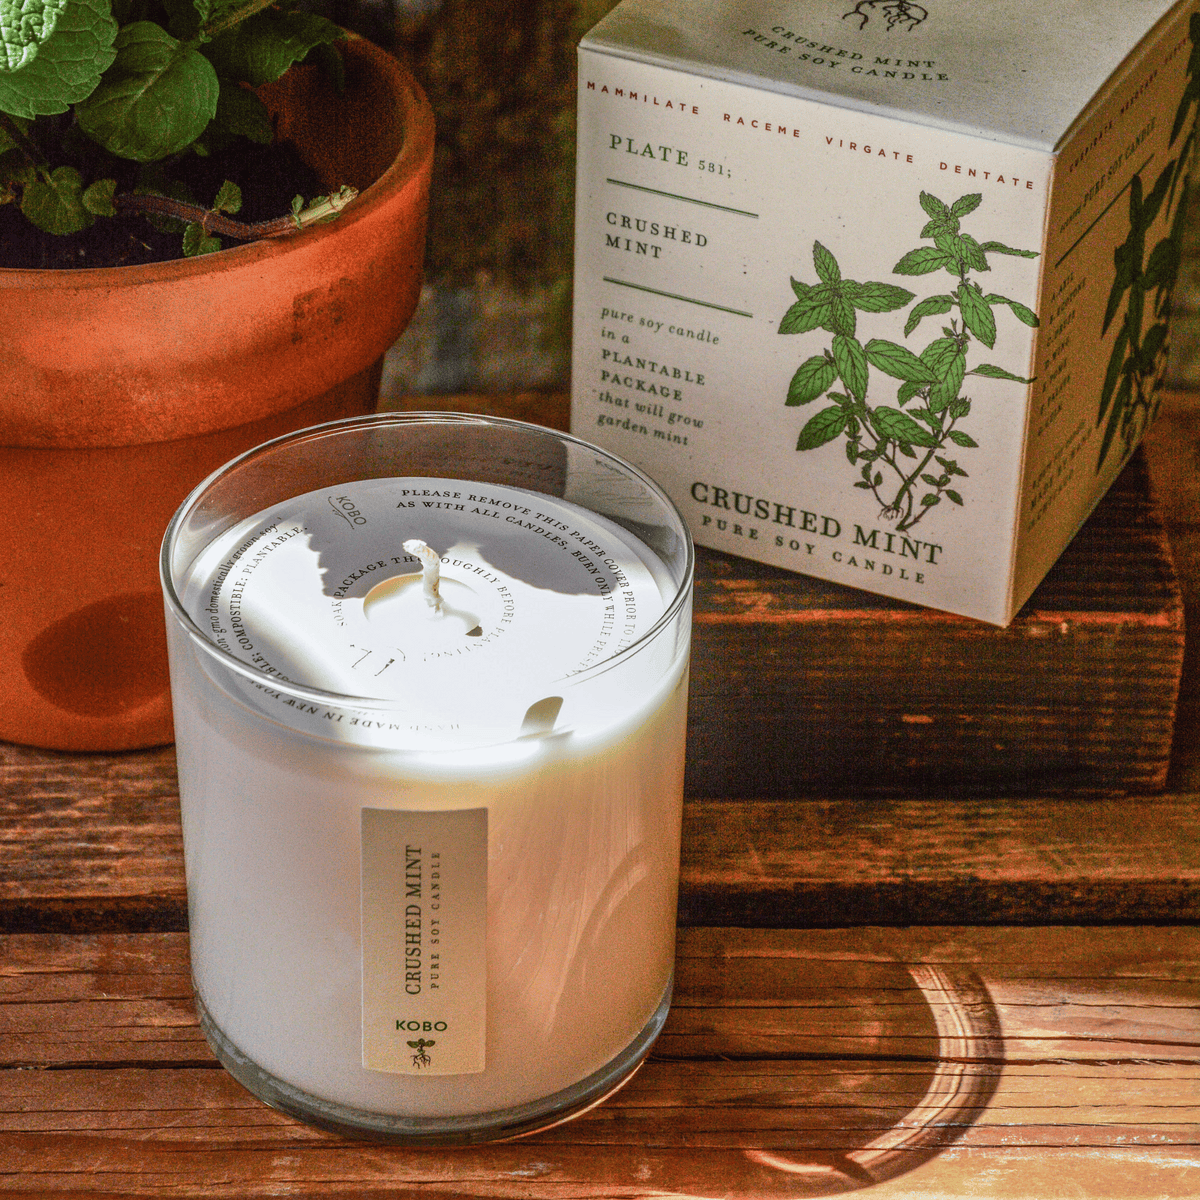 Alternate Image of Crushed Mint Plant the Box Candle